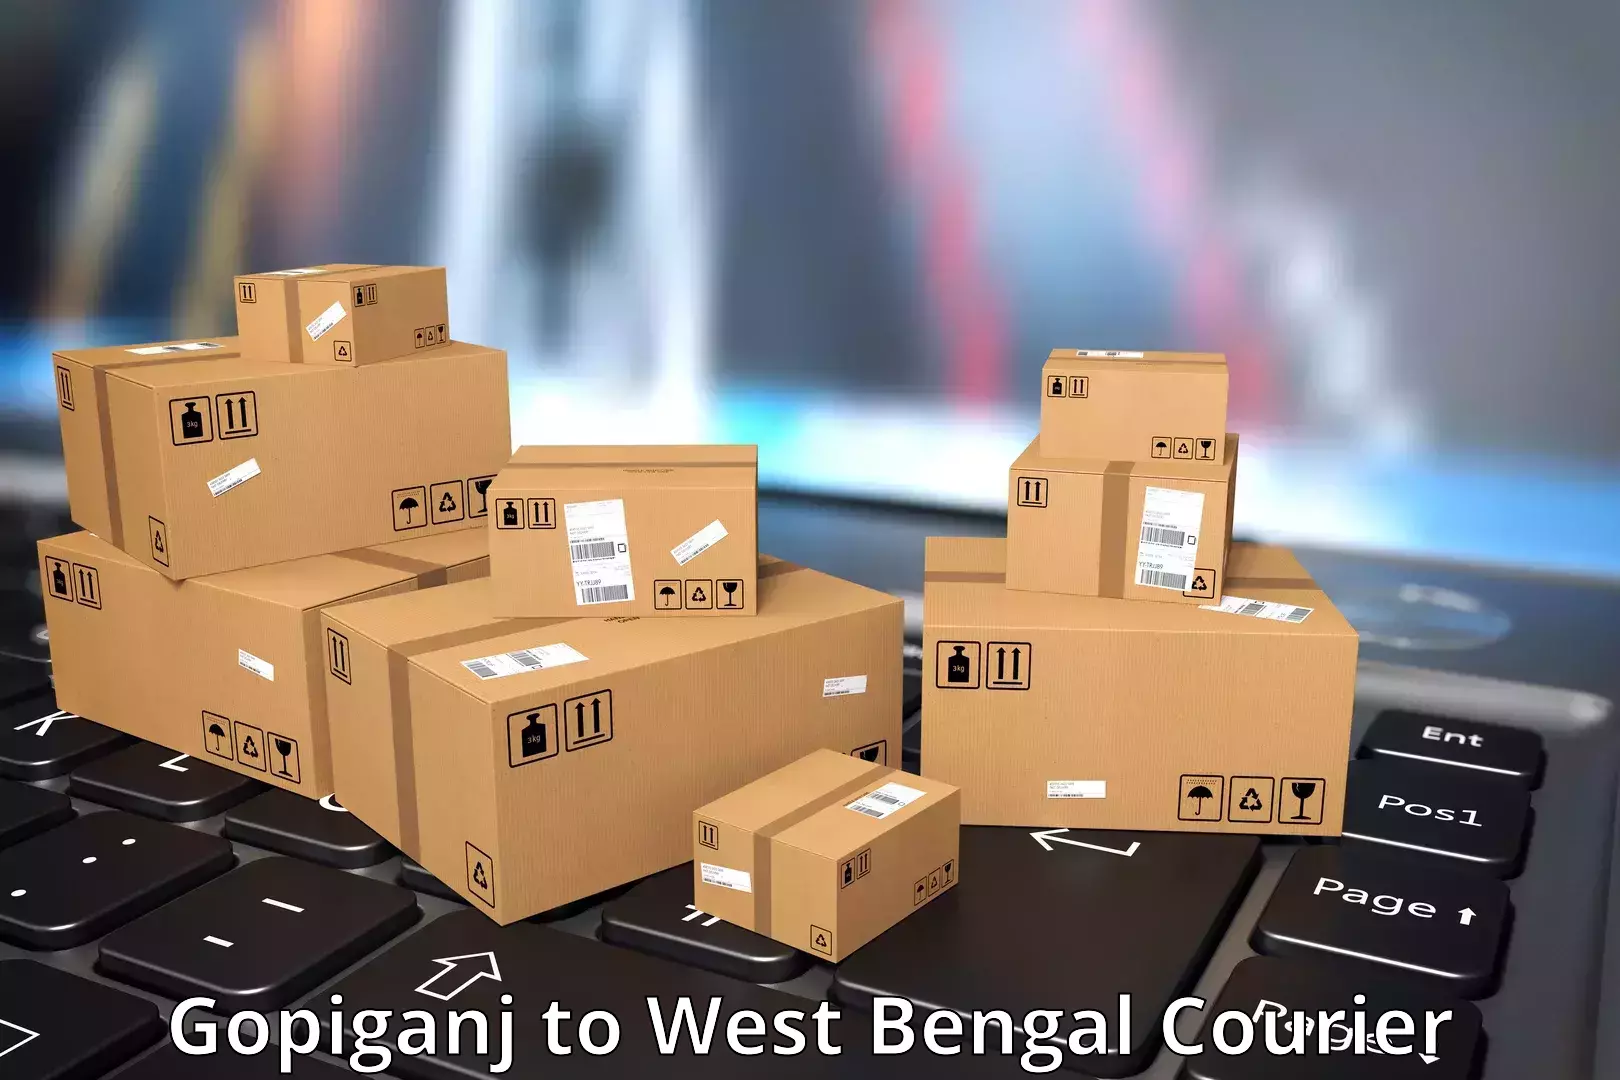 International courier networks Gopiganj to West Bengal